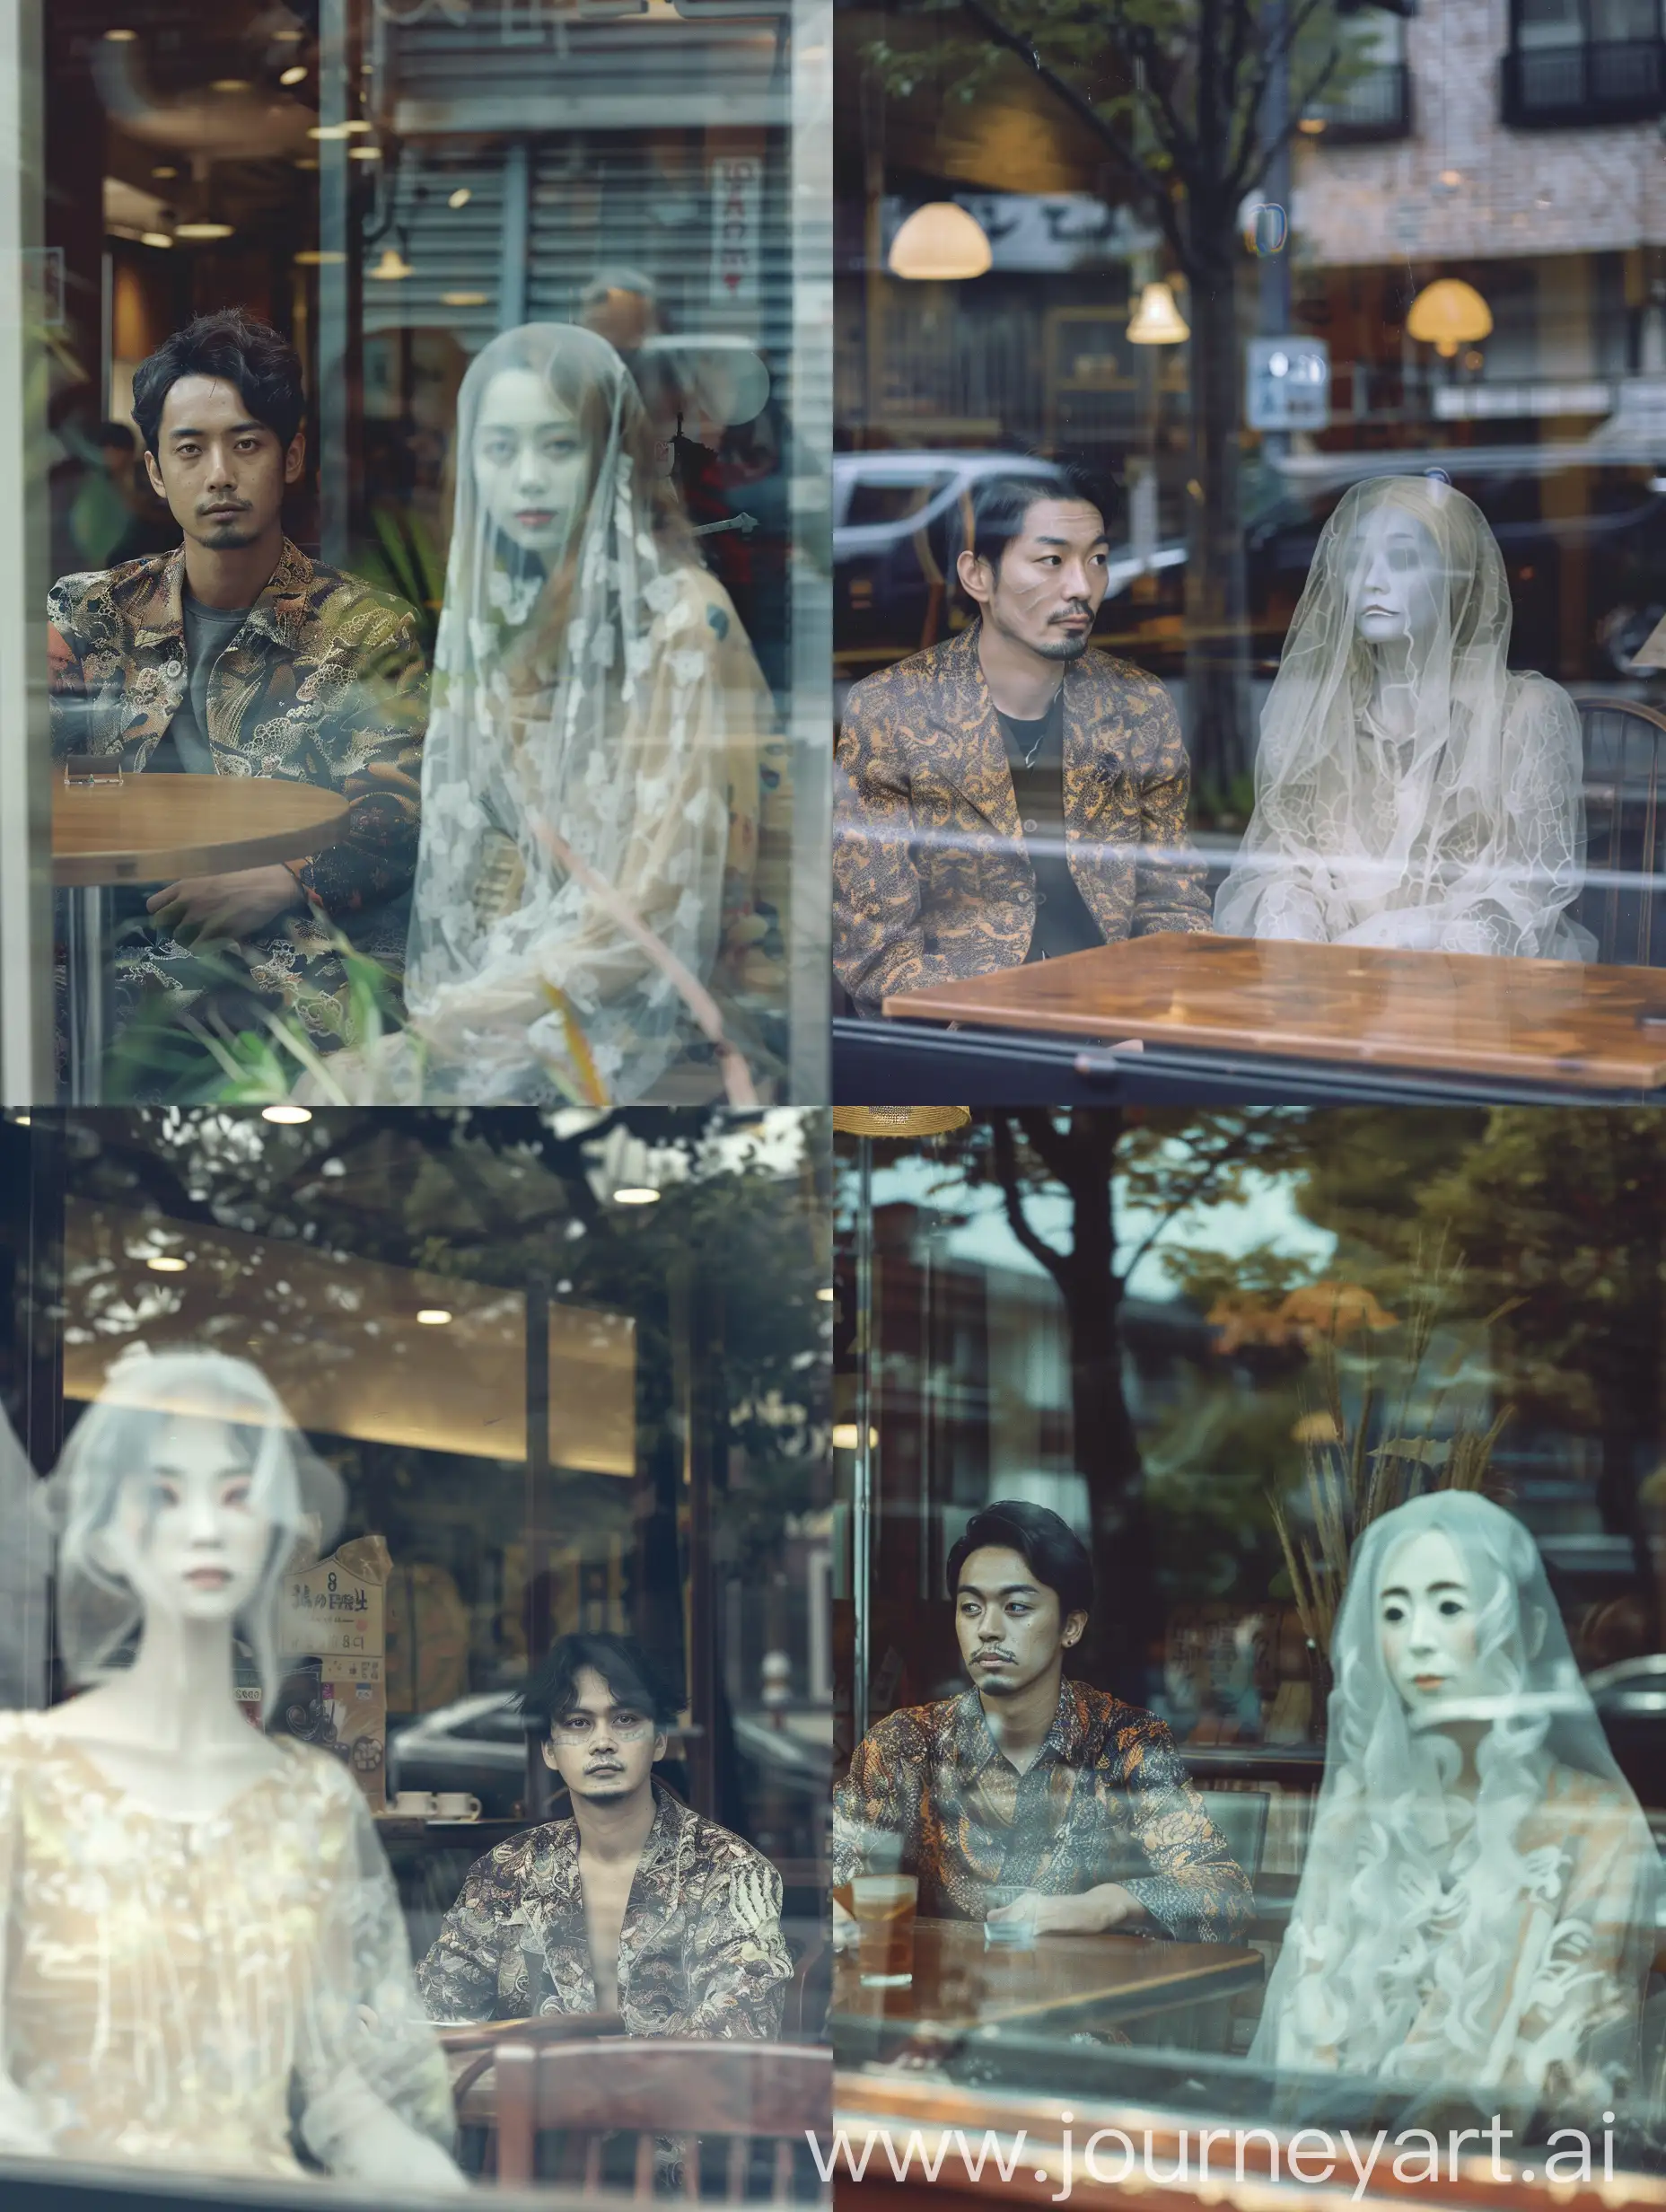 Fashionable-Japanese-Man-Unaware-of-Elegantly-Sinister-Ghost-in-Cafe-Window